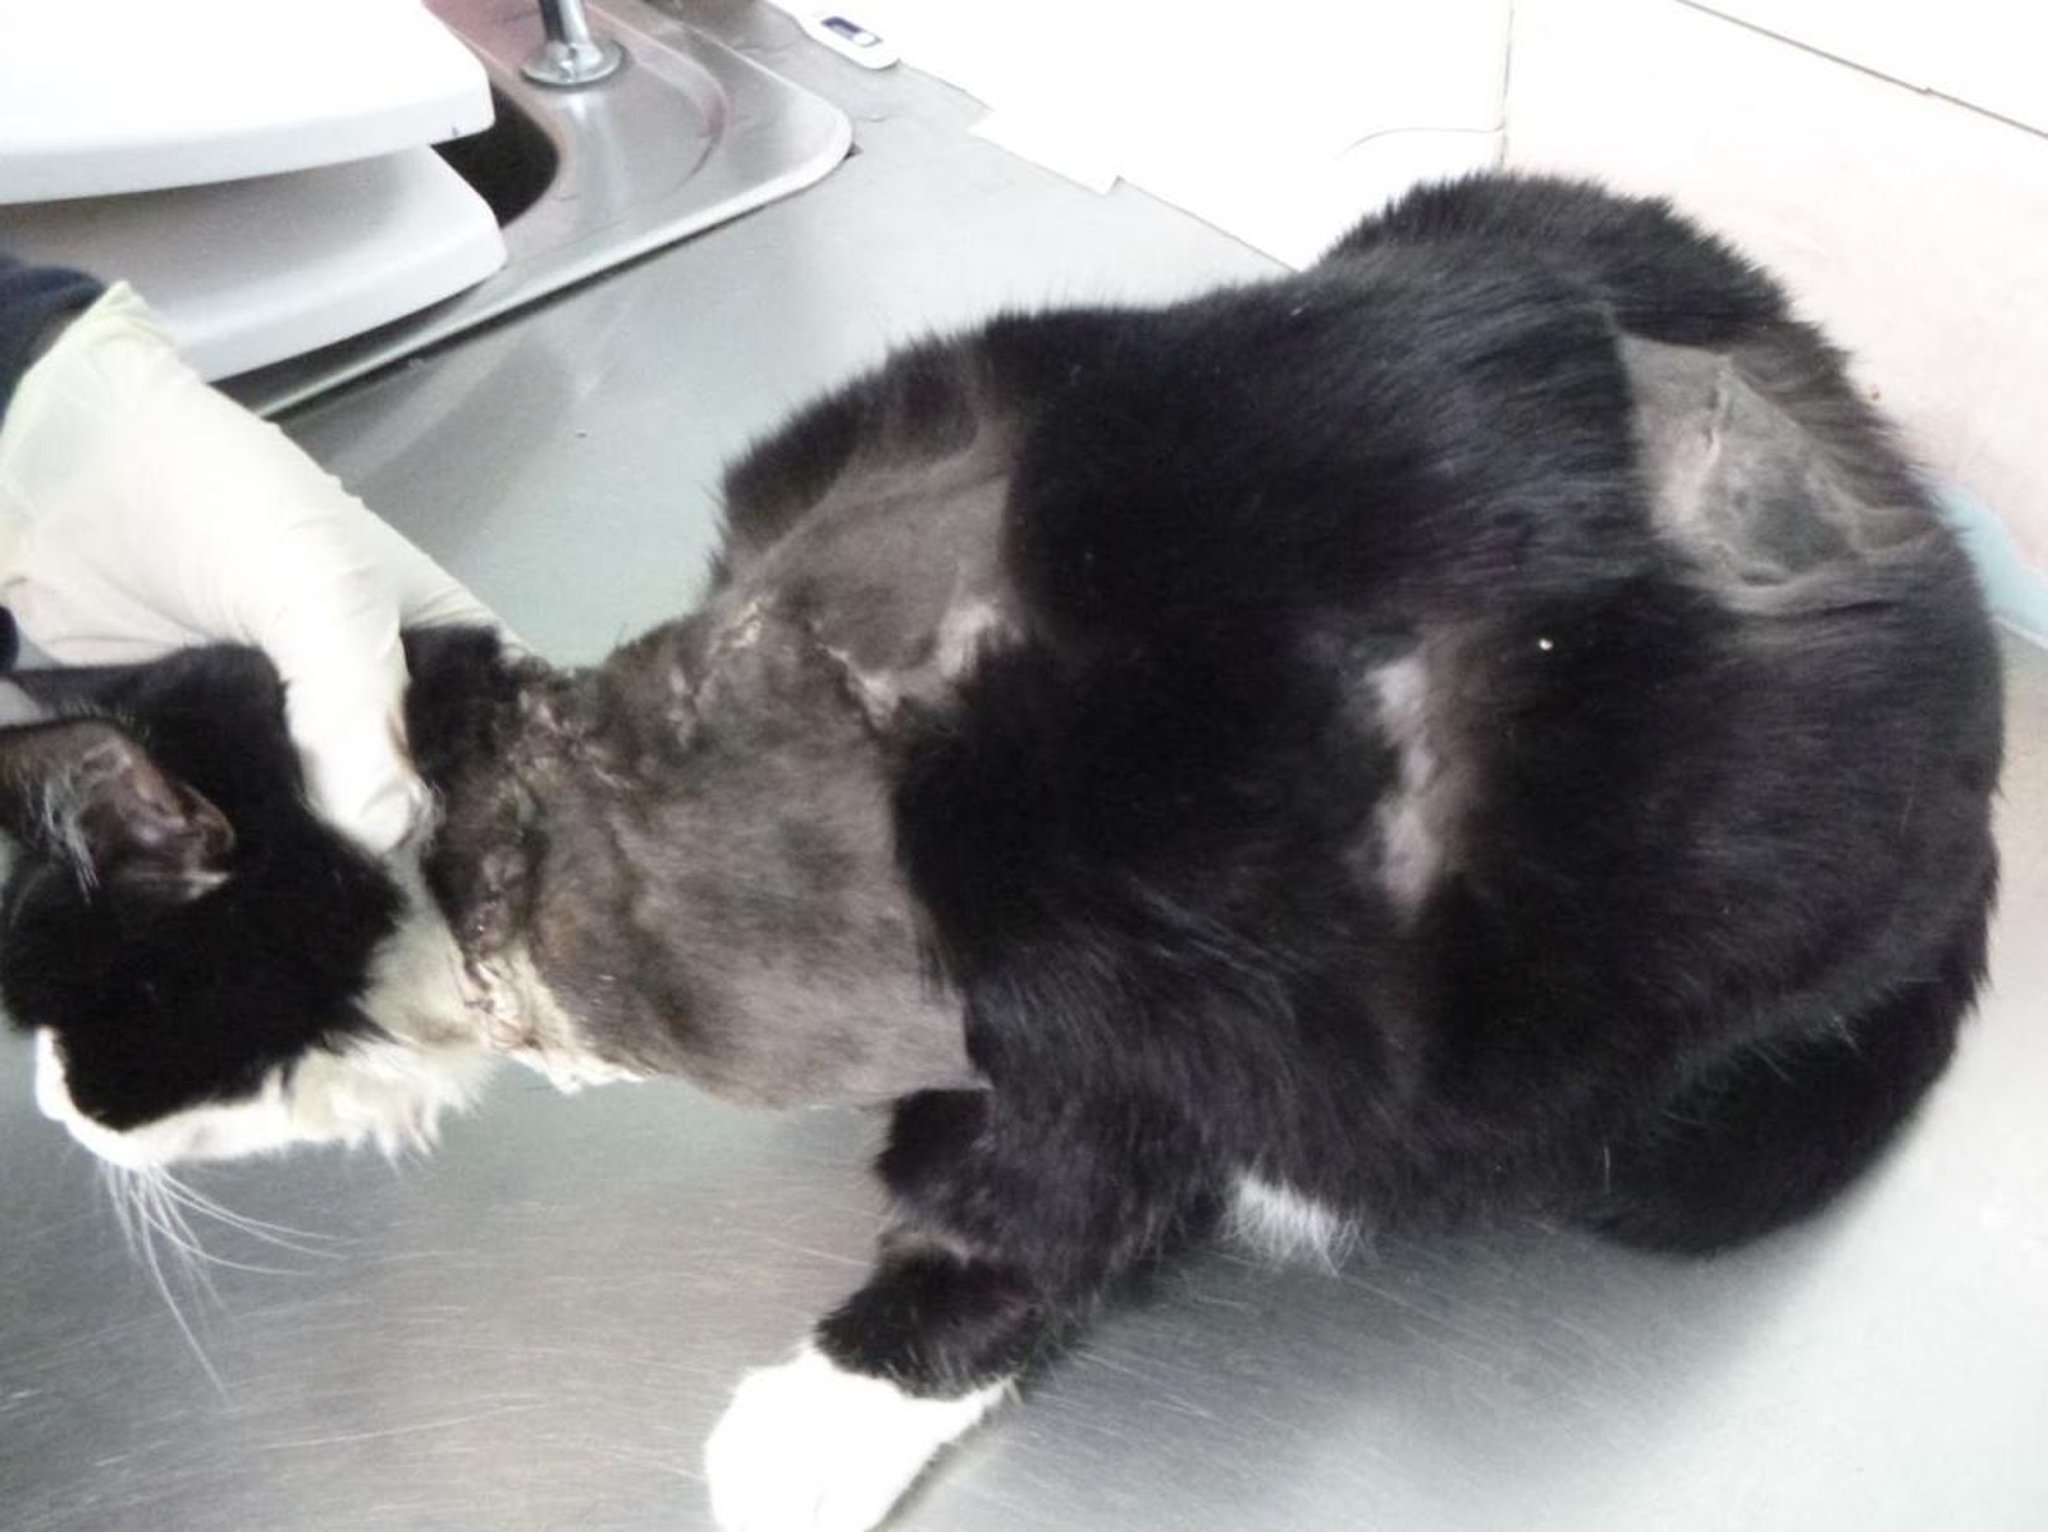 Miracle cat survives multiple stab wounds to enjoy a new life in Wigan